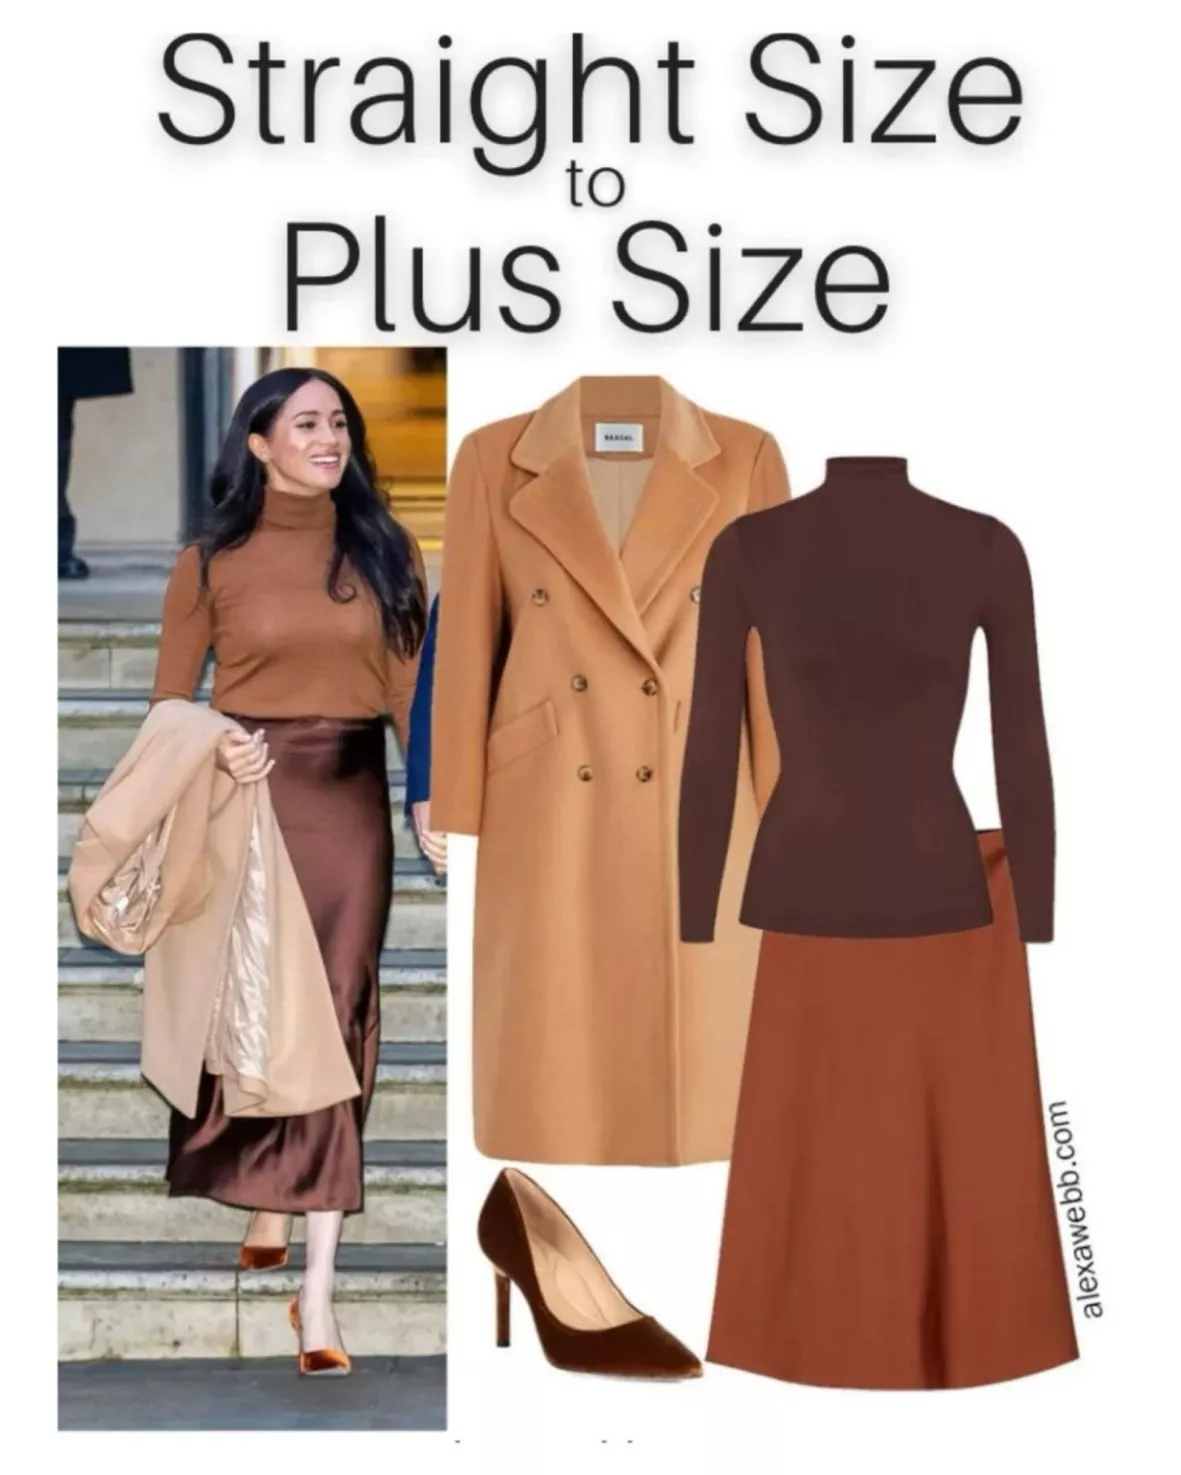 Plus Size on a Budget – Summer Business Casual Outfits - Alexa Webb